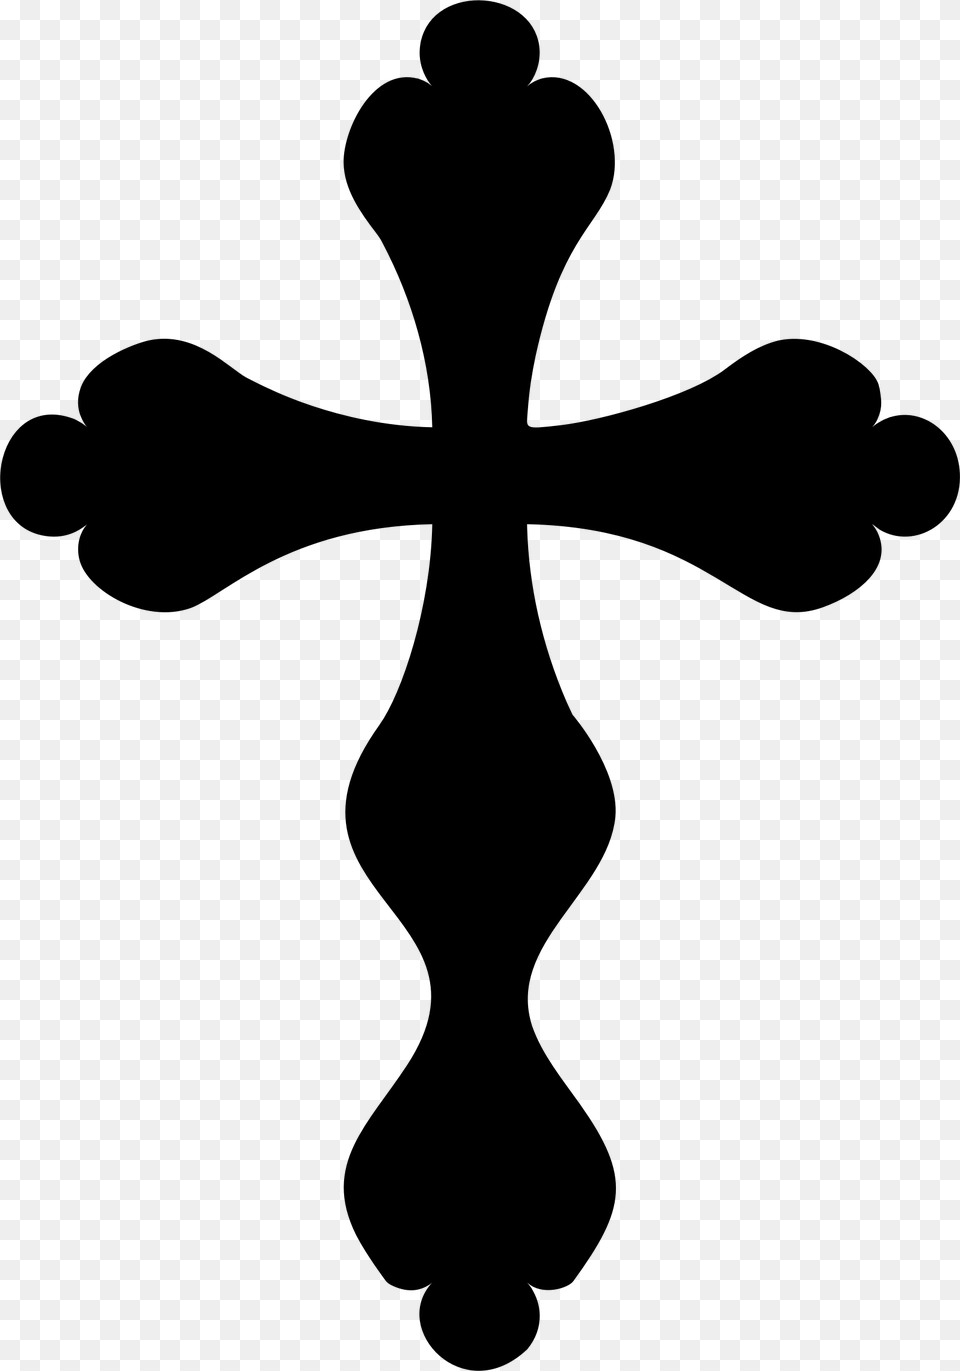 Clipart Freeuse Download Stylized Cross Big Image Silhouette Images Of Cross, Gray Free Png